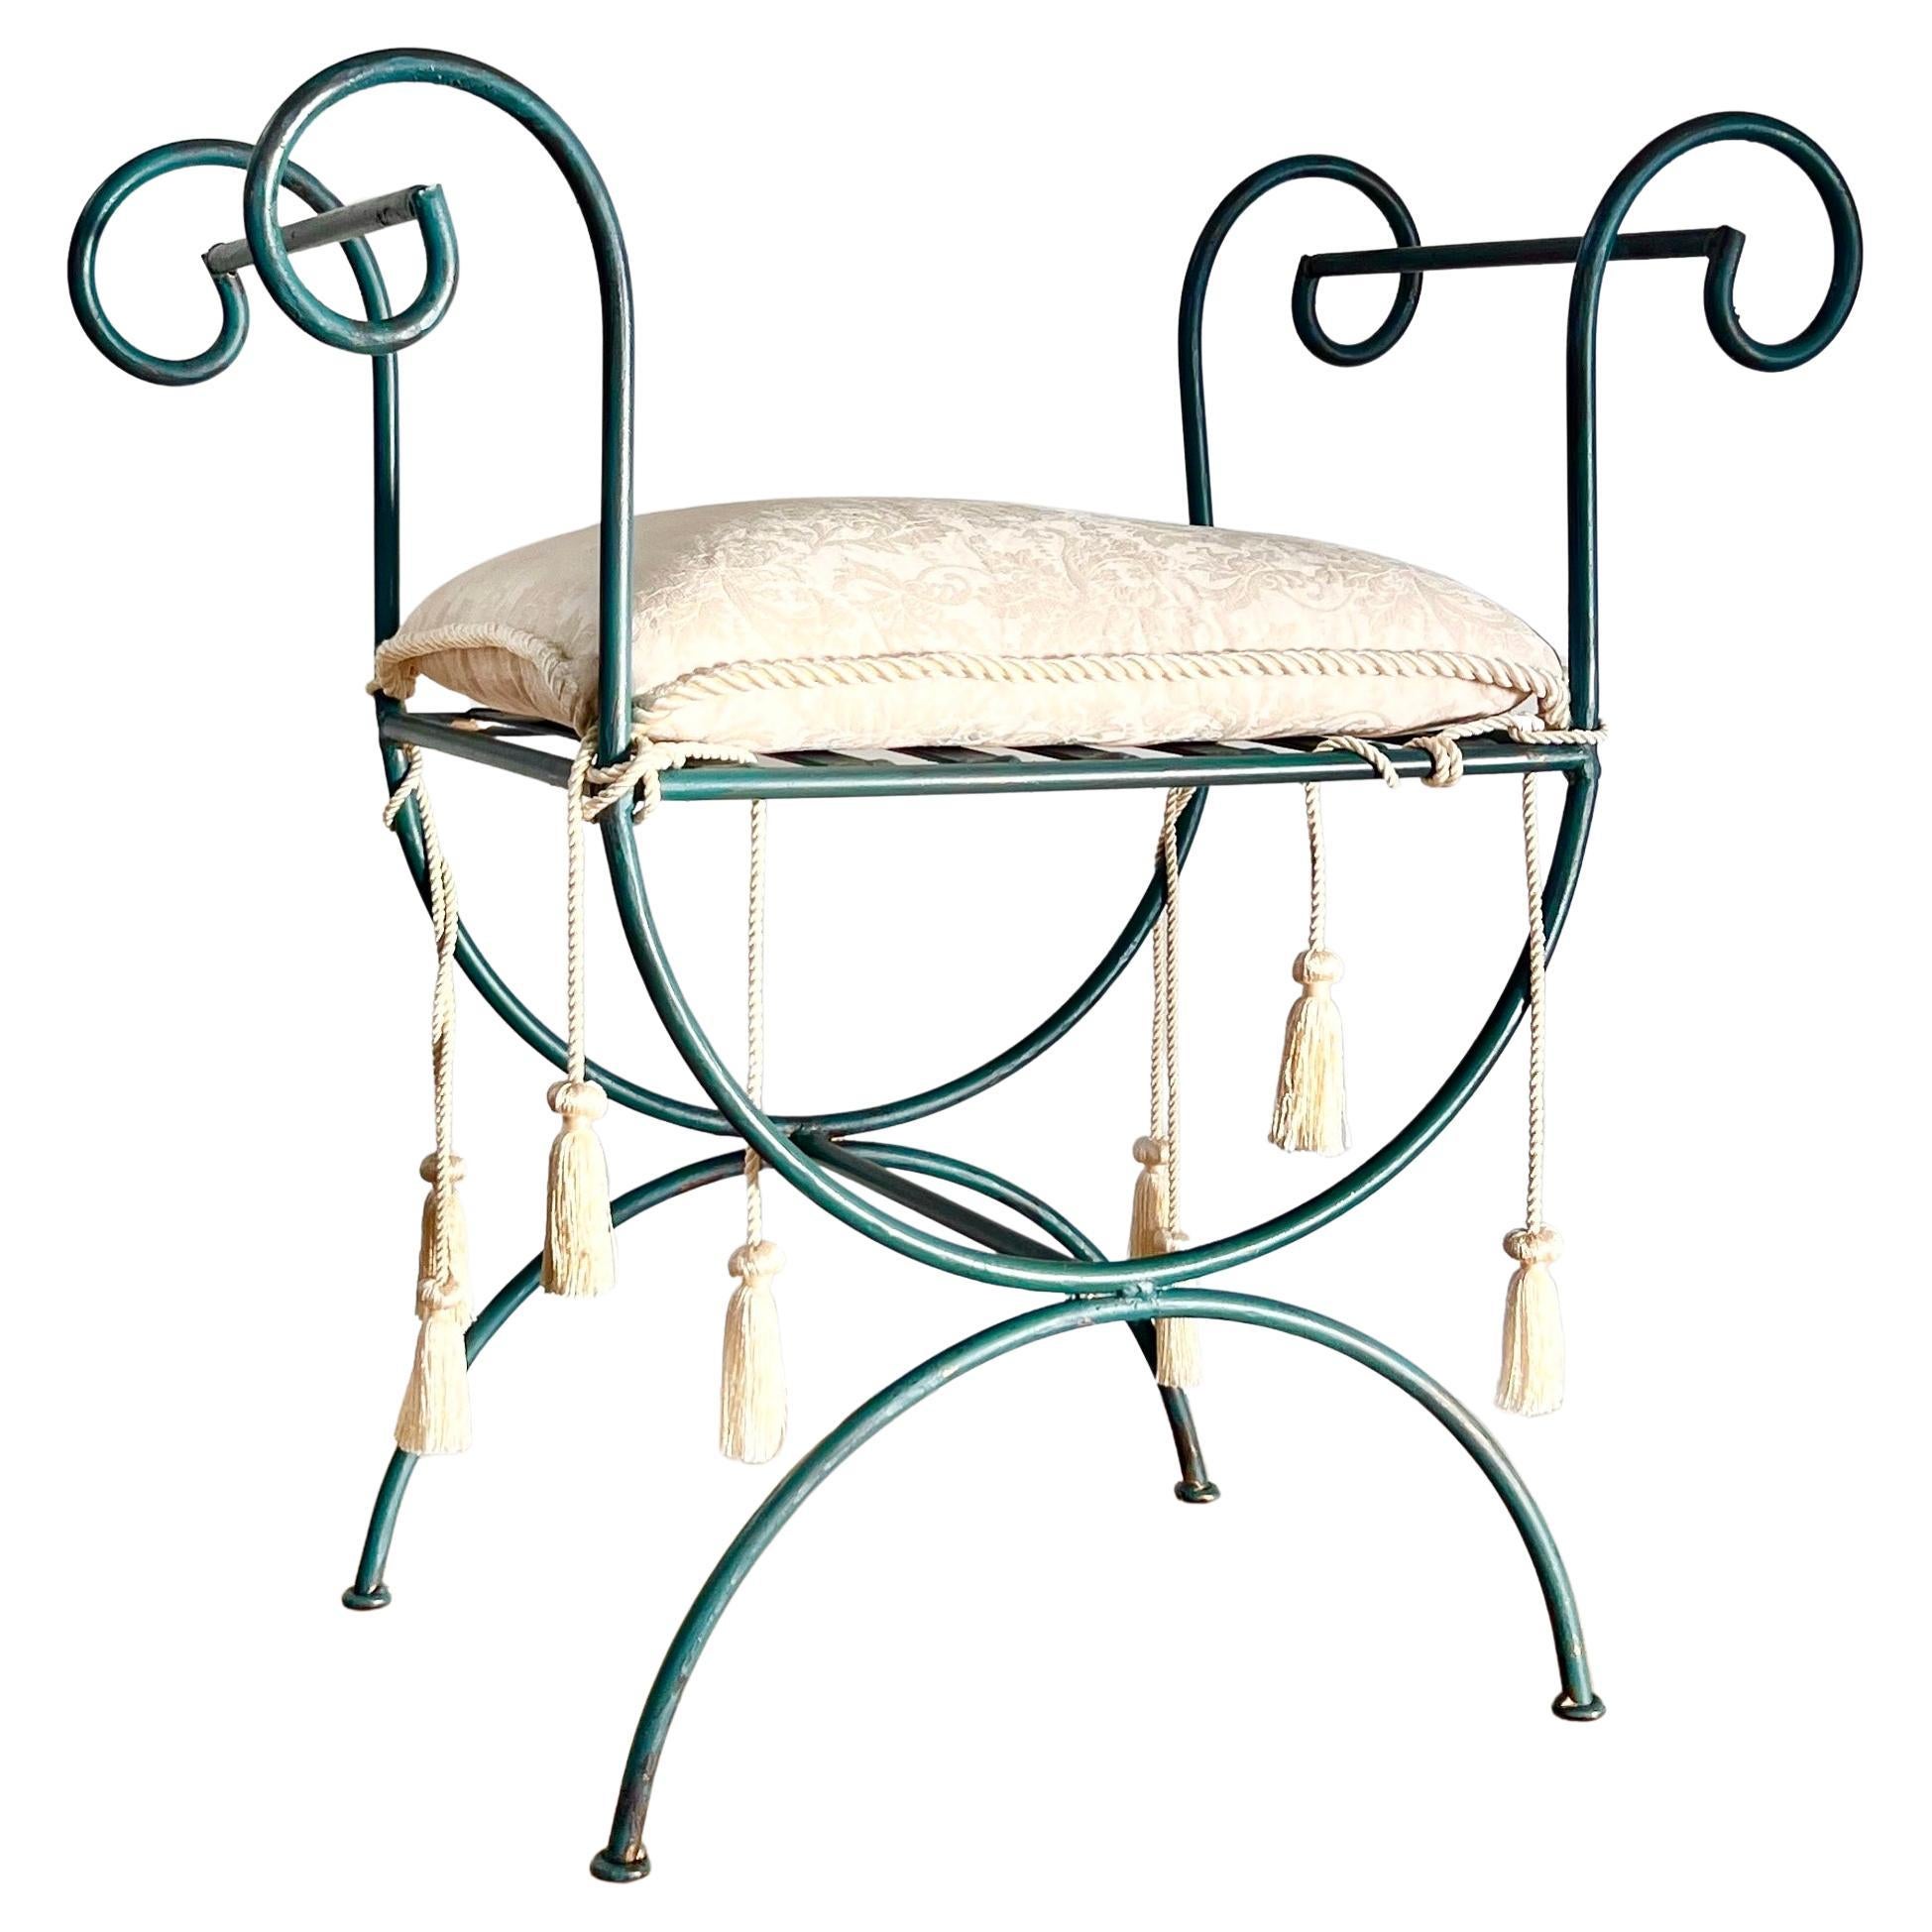 Vintage iron vanity stool with tasseled seat pillow, 20th century  For Sale